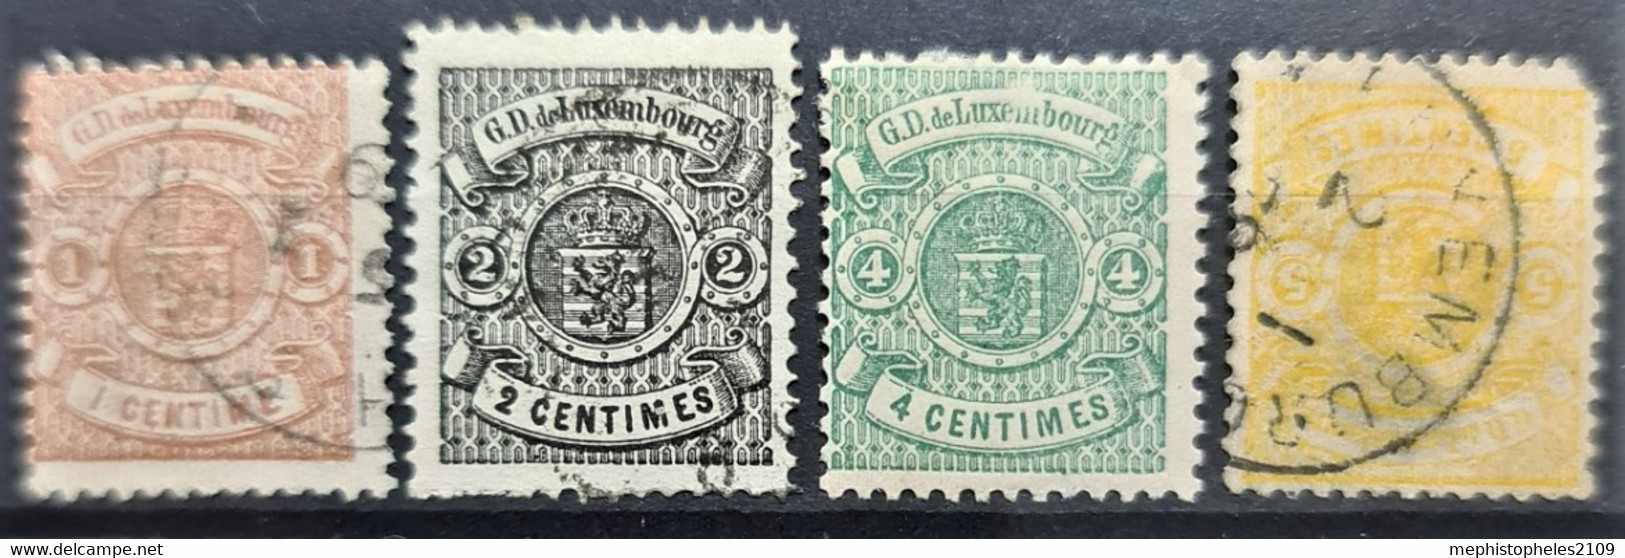 LUXEMBOURG 1876 - MLH/canceled - Sc# 29-32 - 1859-1880 Coat Of Arms